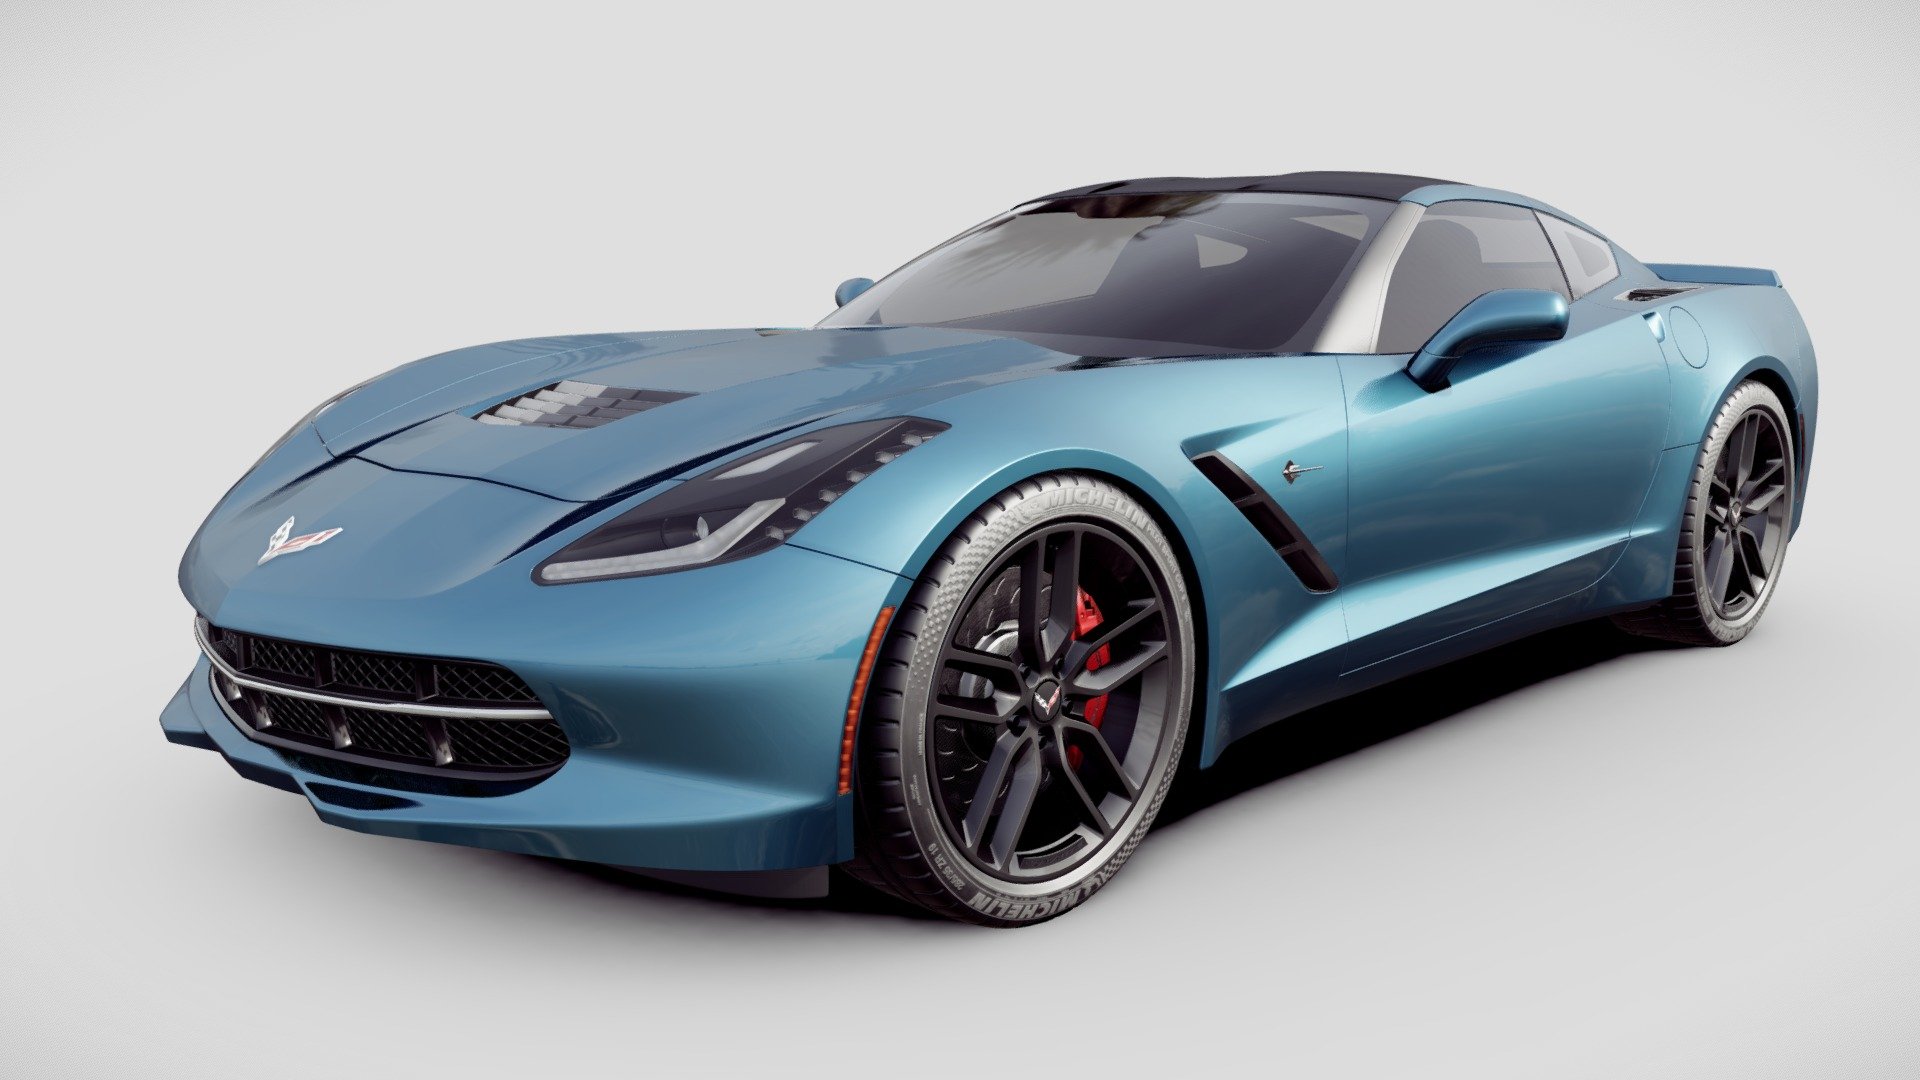 The Chevrolet Corvette (C7) is the seventh generation of the Corvette sports car manufactured by American automobile manufacturer Chevrolet. It was introduced for the 2014 model year as the first to bear the Corvette Stingray name since the 1968 third generation model. The first C7 Corvettes were delivered in the third quarter of 2013 3d model